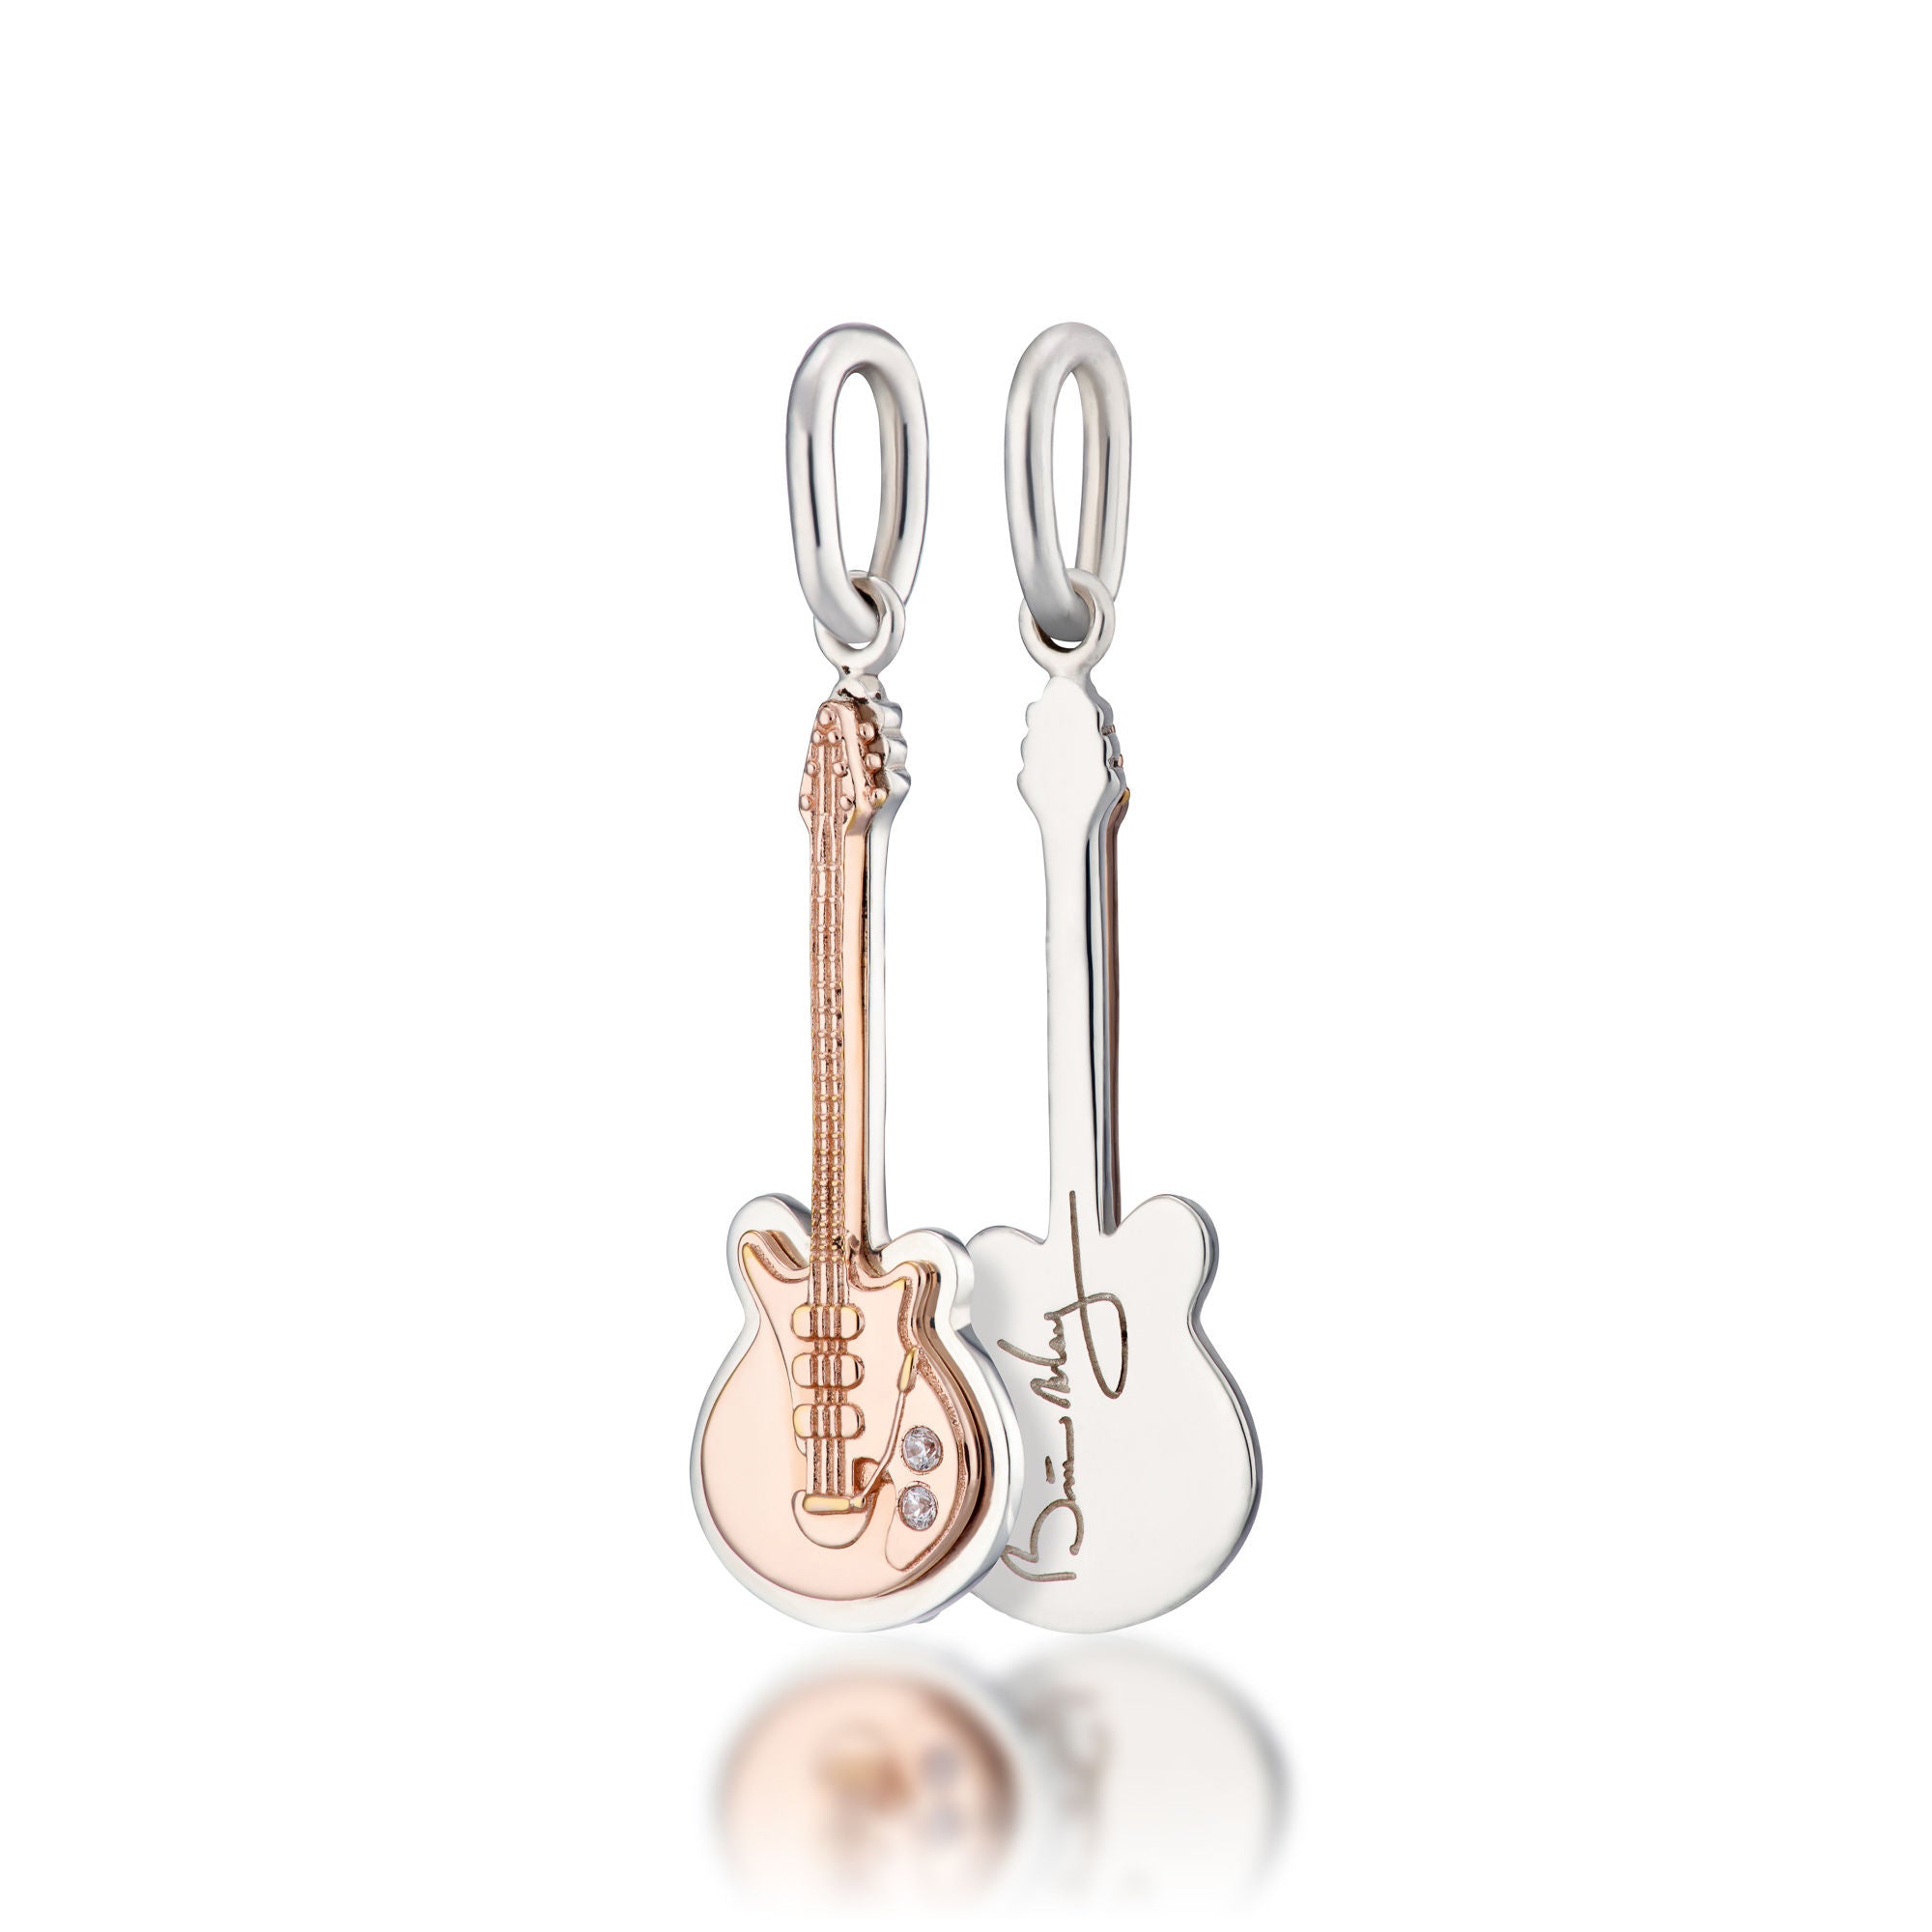 Queen - Brian May Guitar Charm